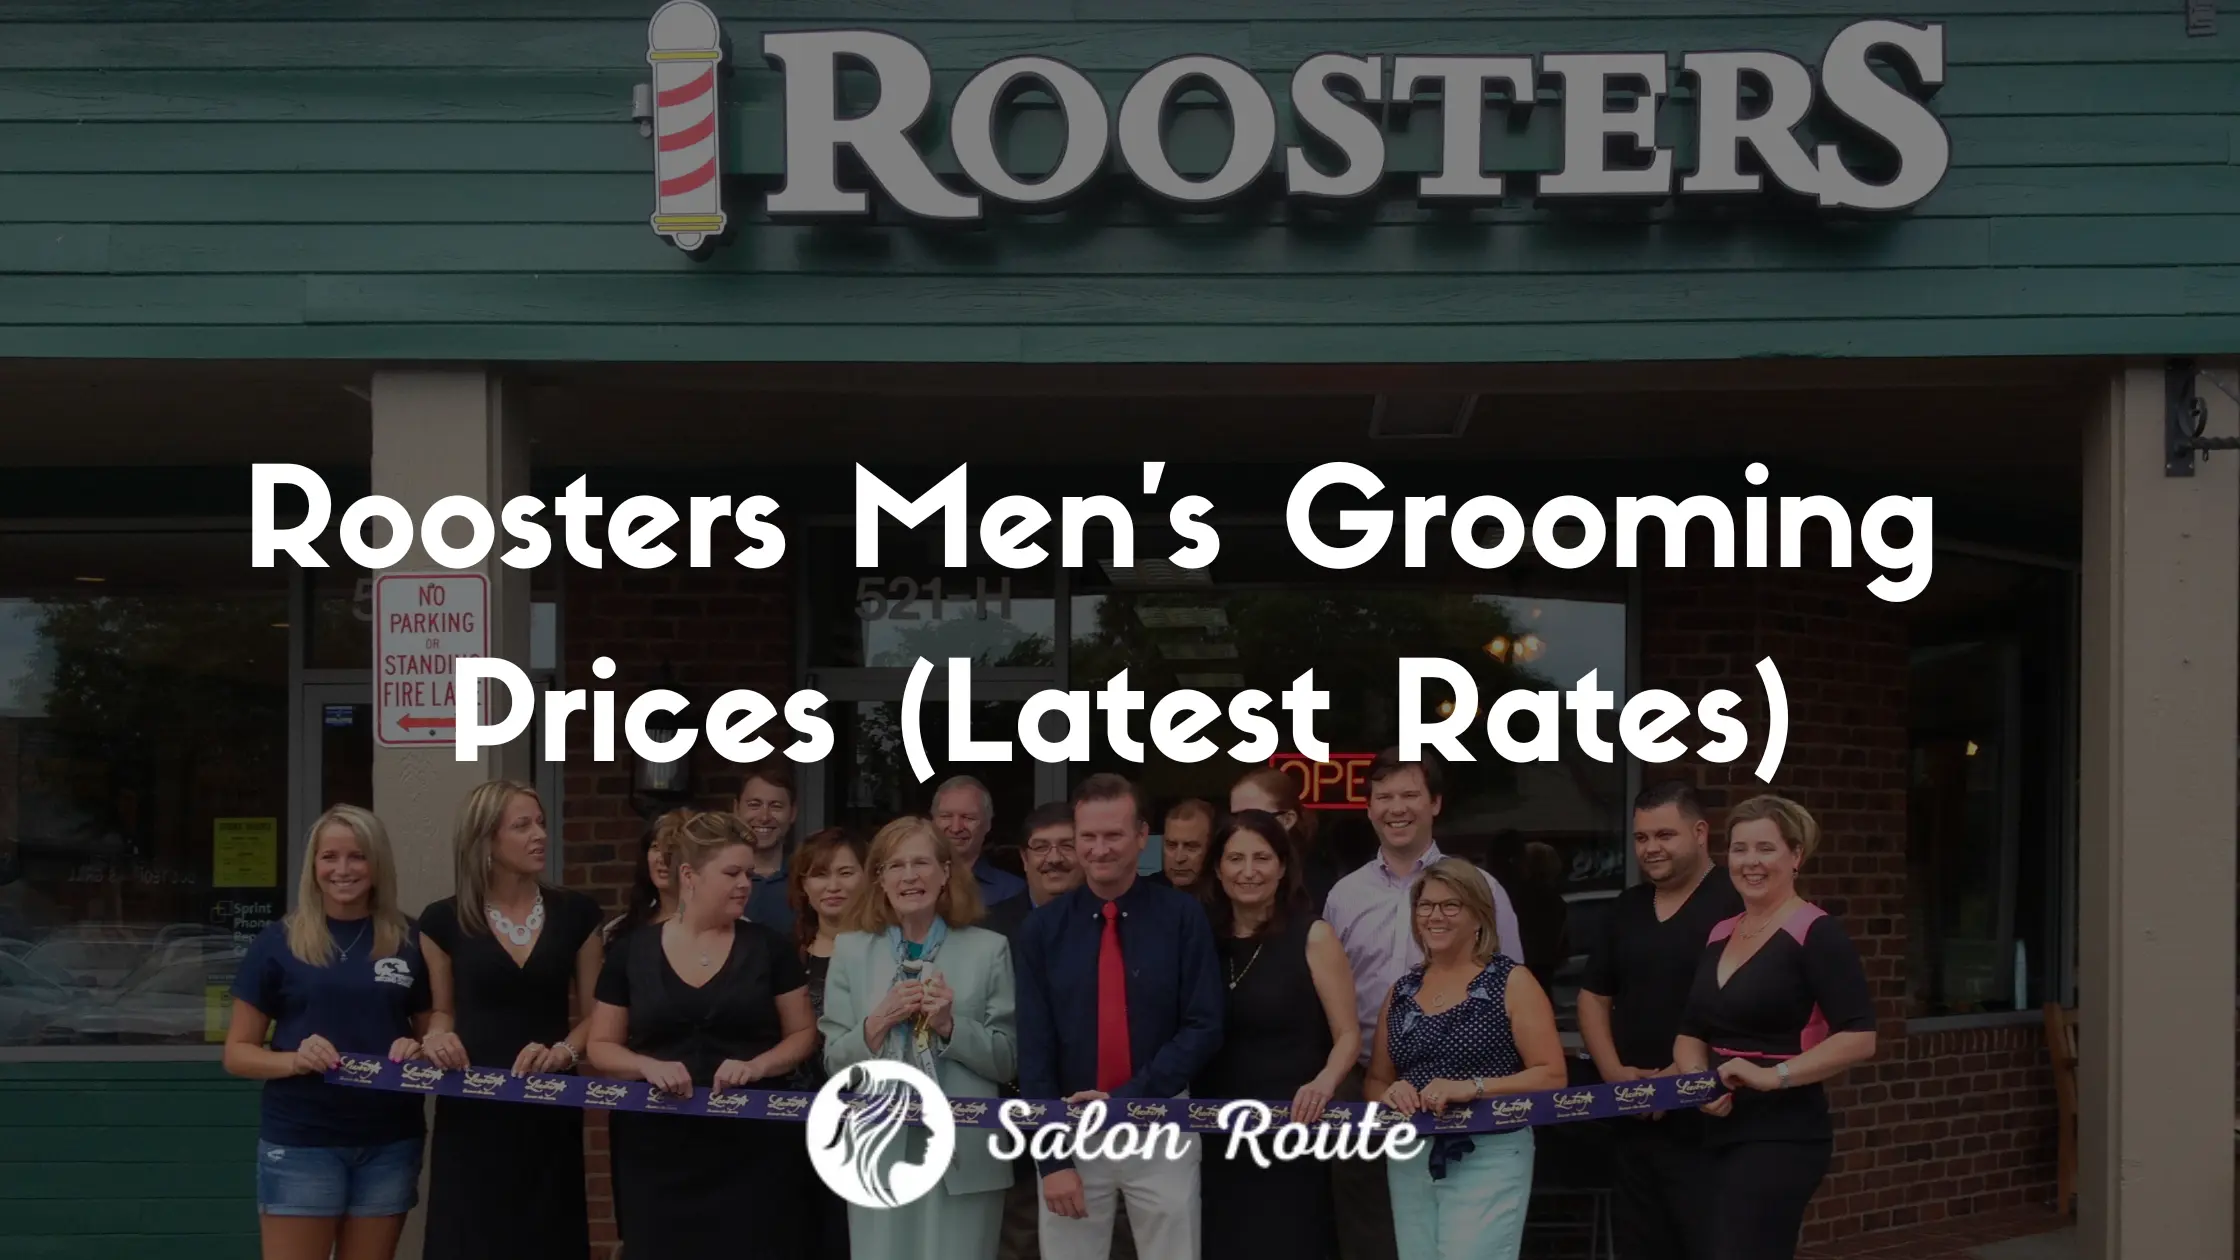 Roosters Men's Grooming Prices (Latest Rates)